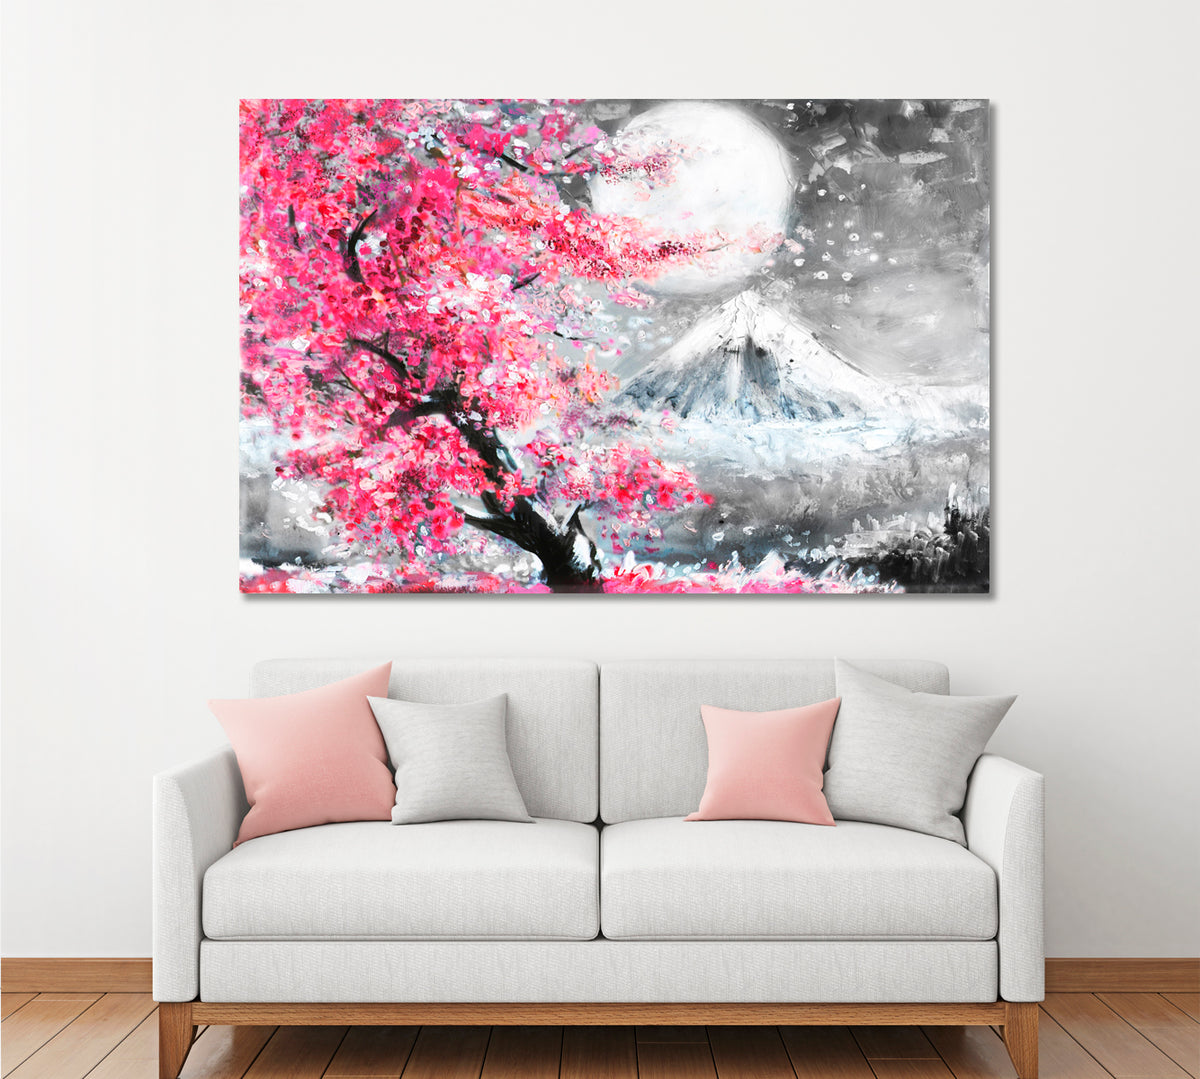 Landscape With Sakura And Mountain Asian Style Canvas Print Wall Art Artesty 1 panel 24" x 16" 